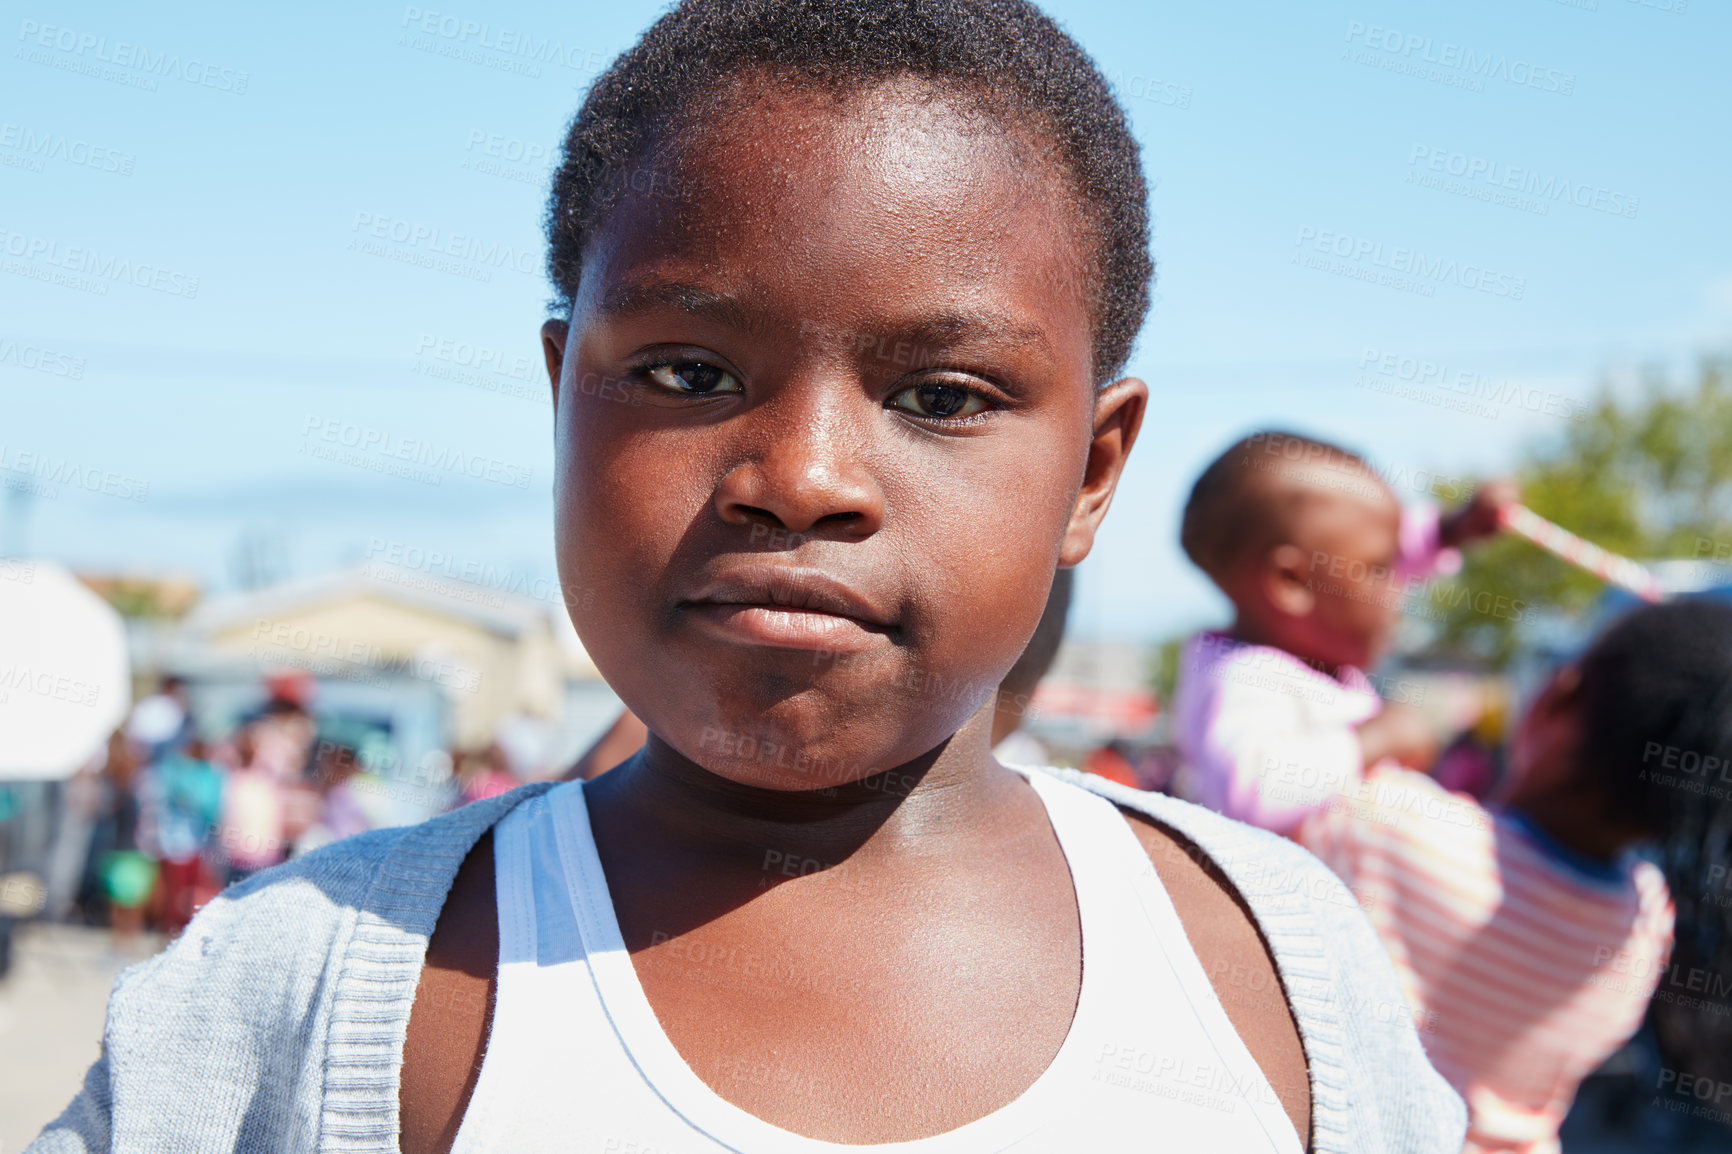 Buy stock photo Cropped portrait of a young child at a community outreach event